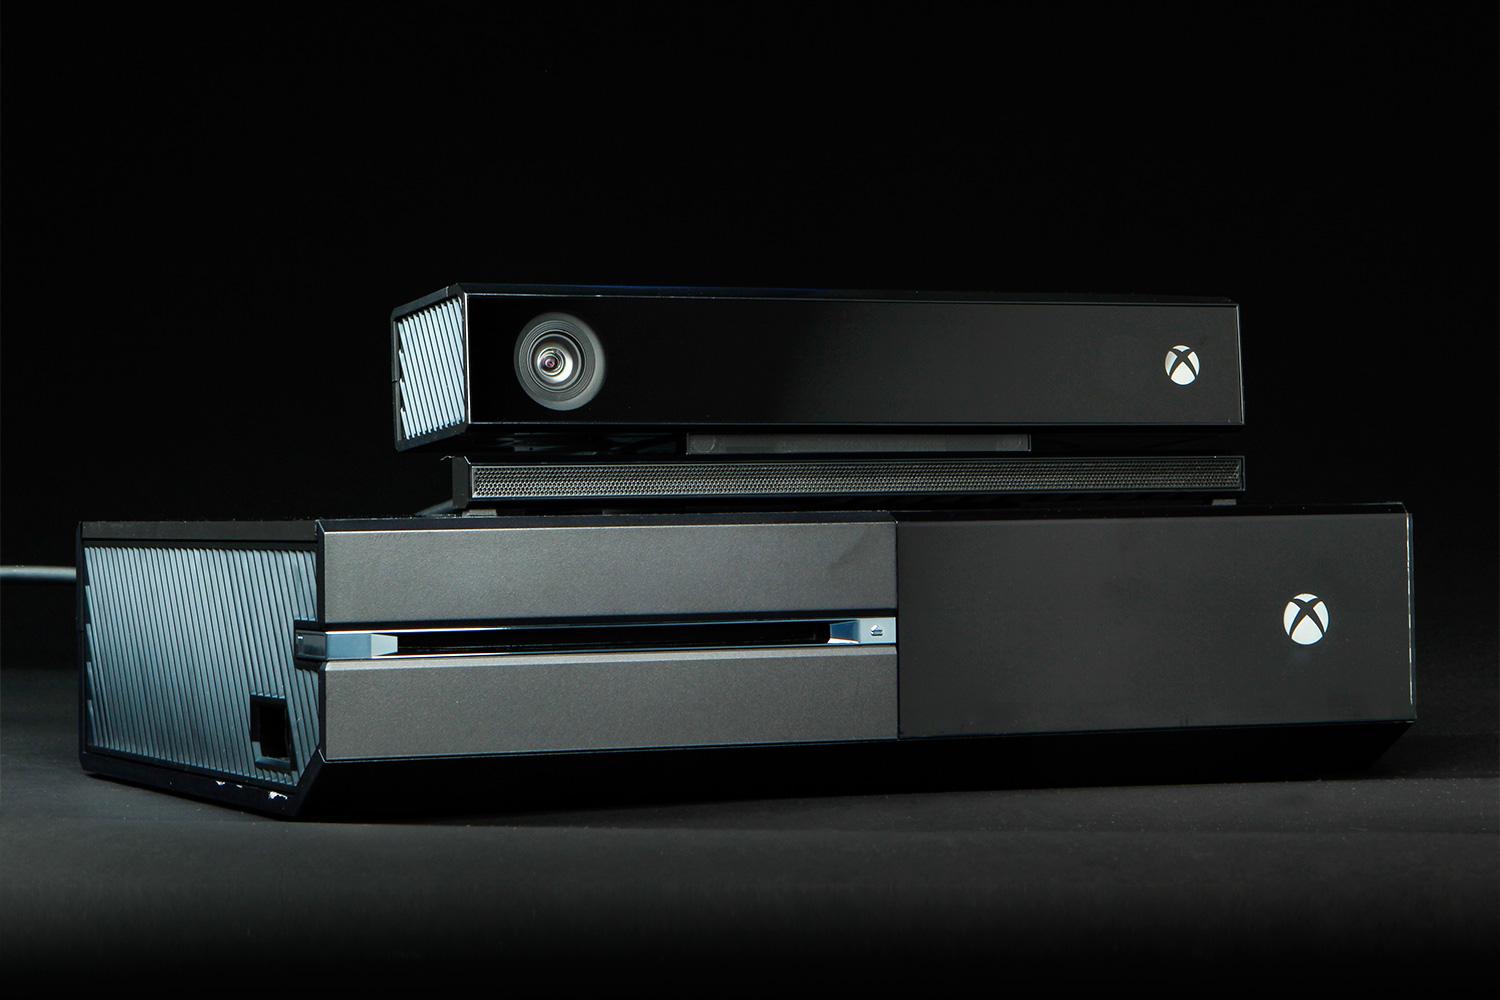 Microsoft to Sell Kinect-less Xbox One - Version Without Camera Peripheral Retails at $399